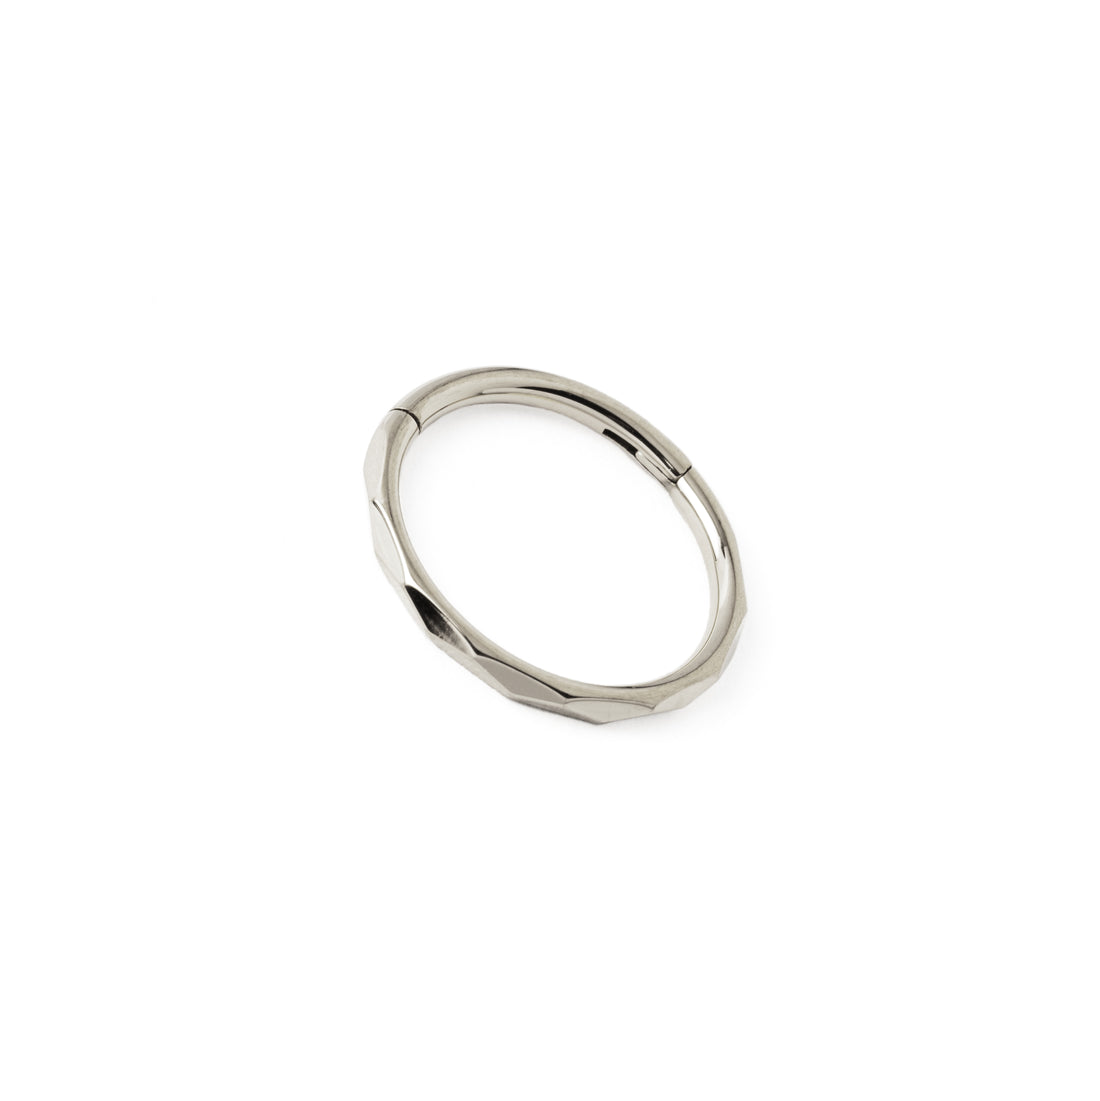 Faceted surgical steel Clicker Ring left side view